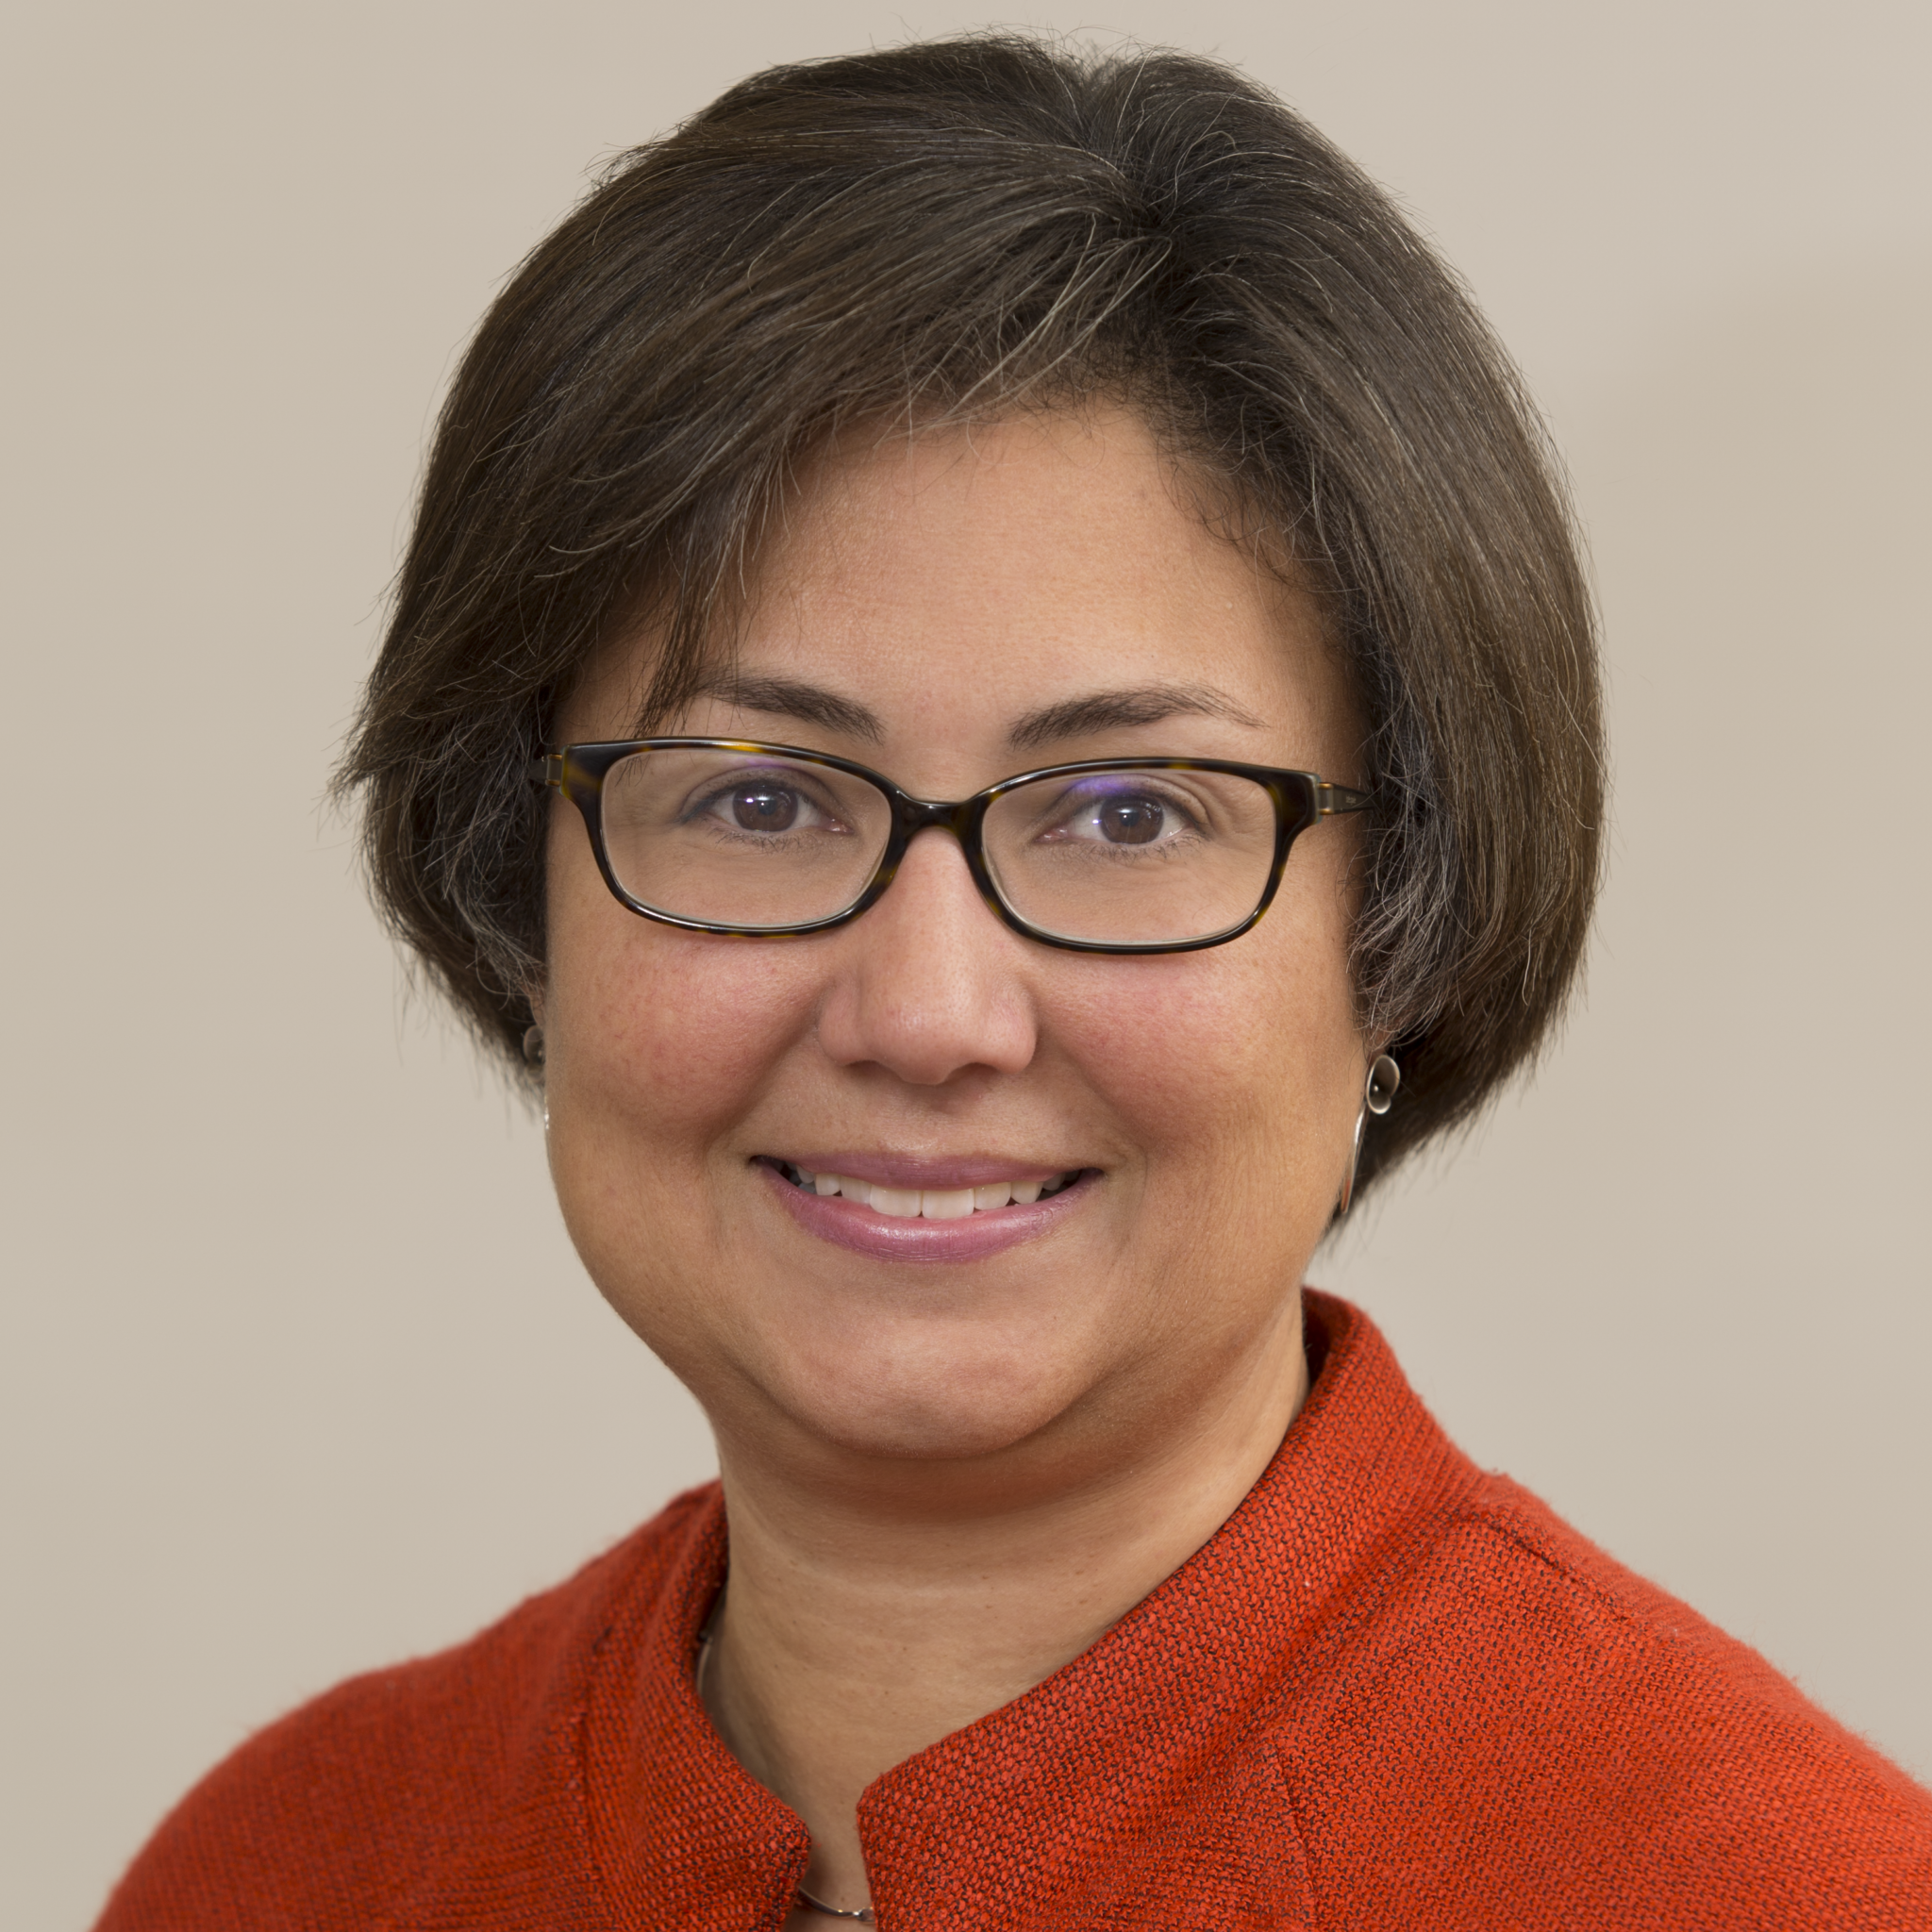 Professional woman in red jacket wearing glasses, human resources executive